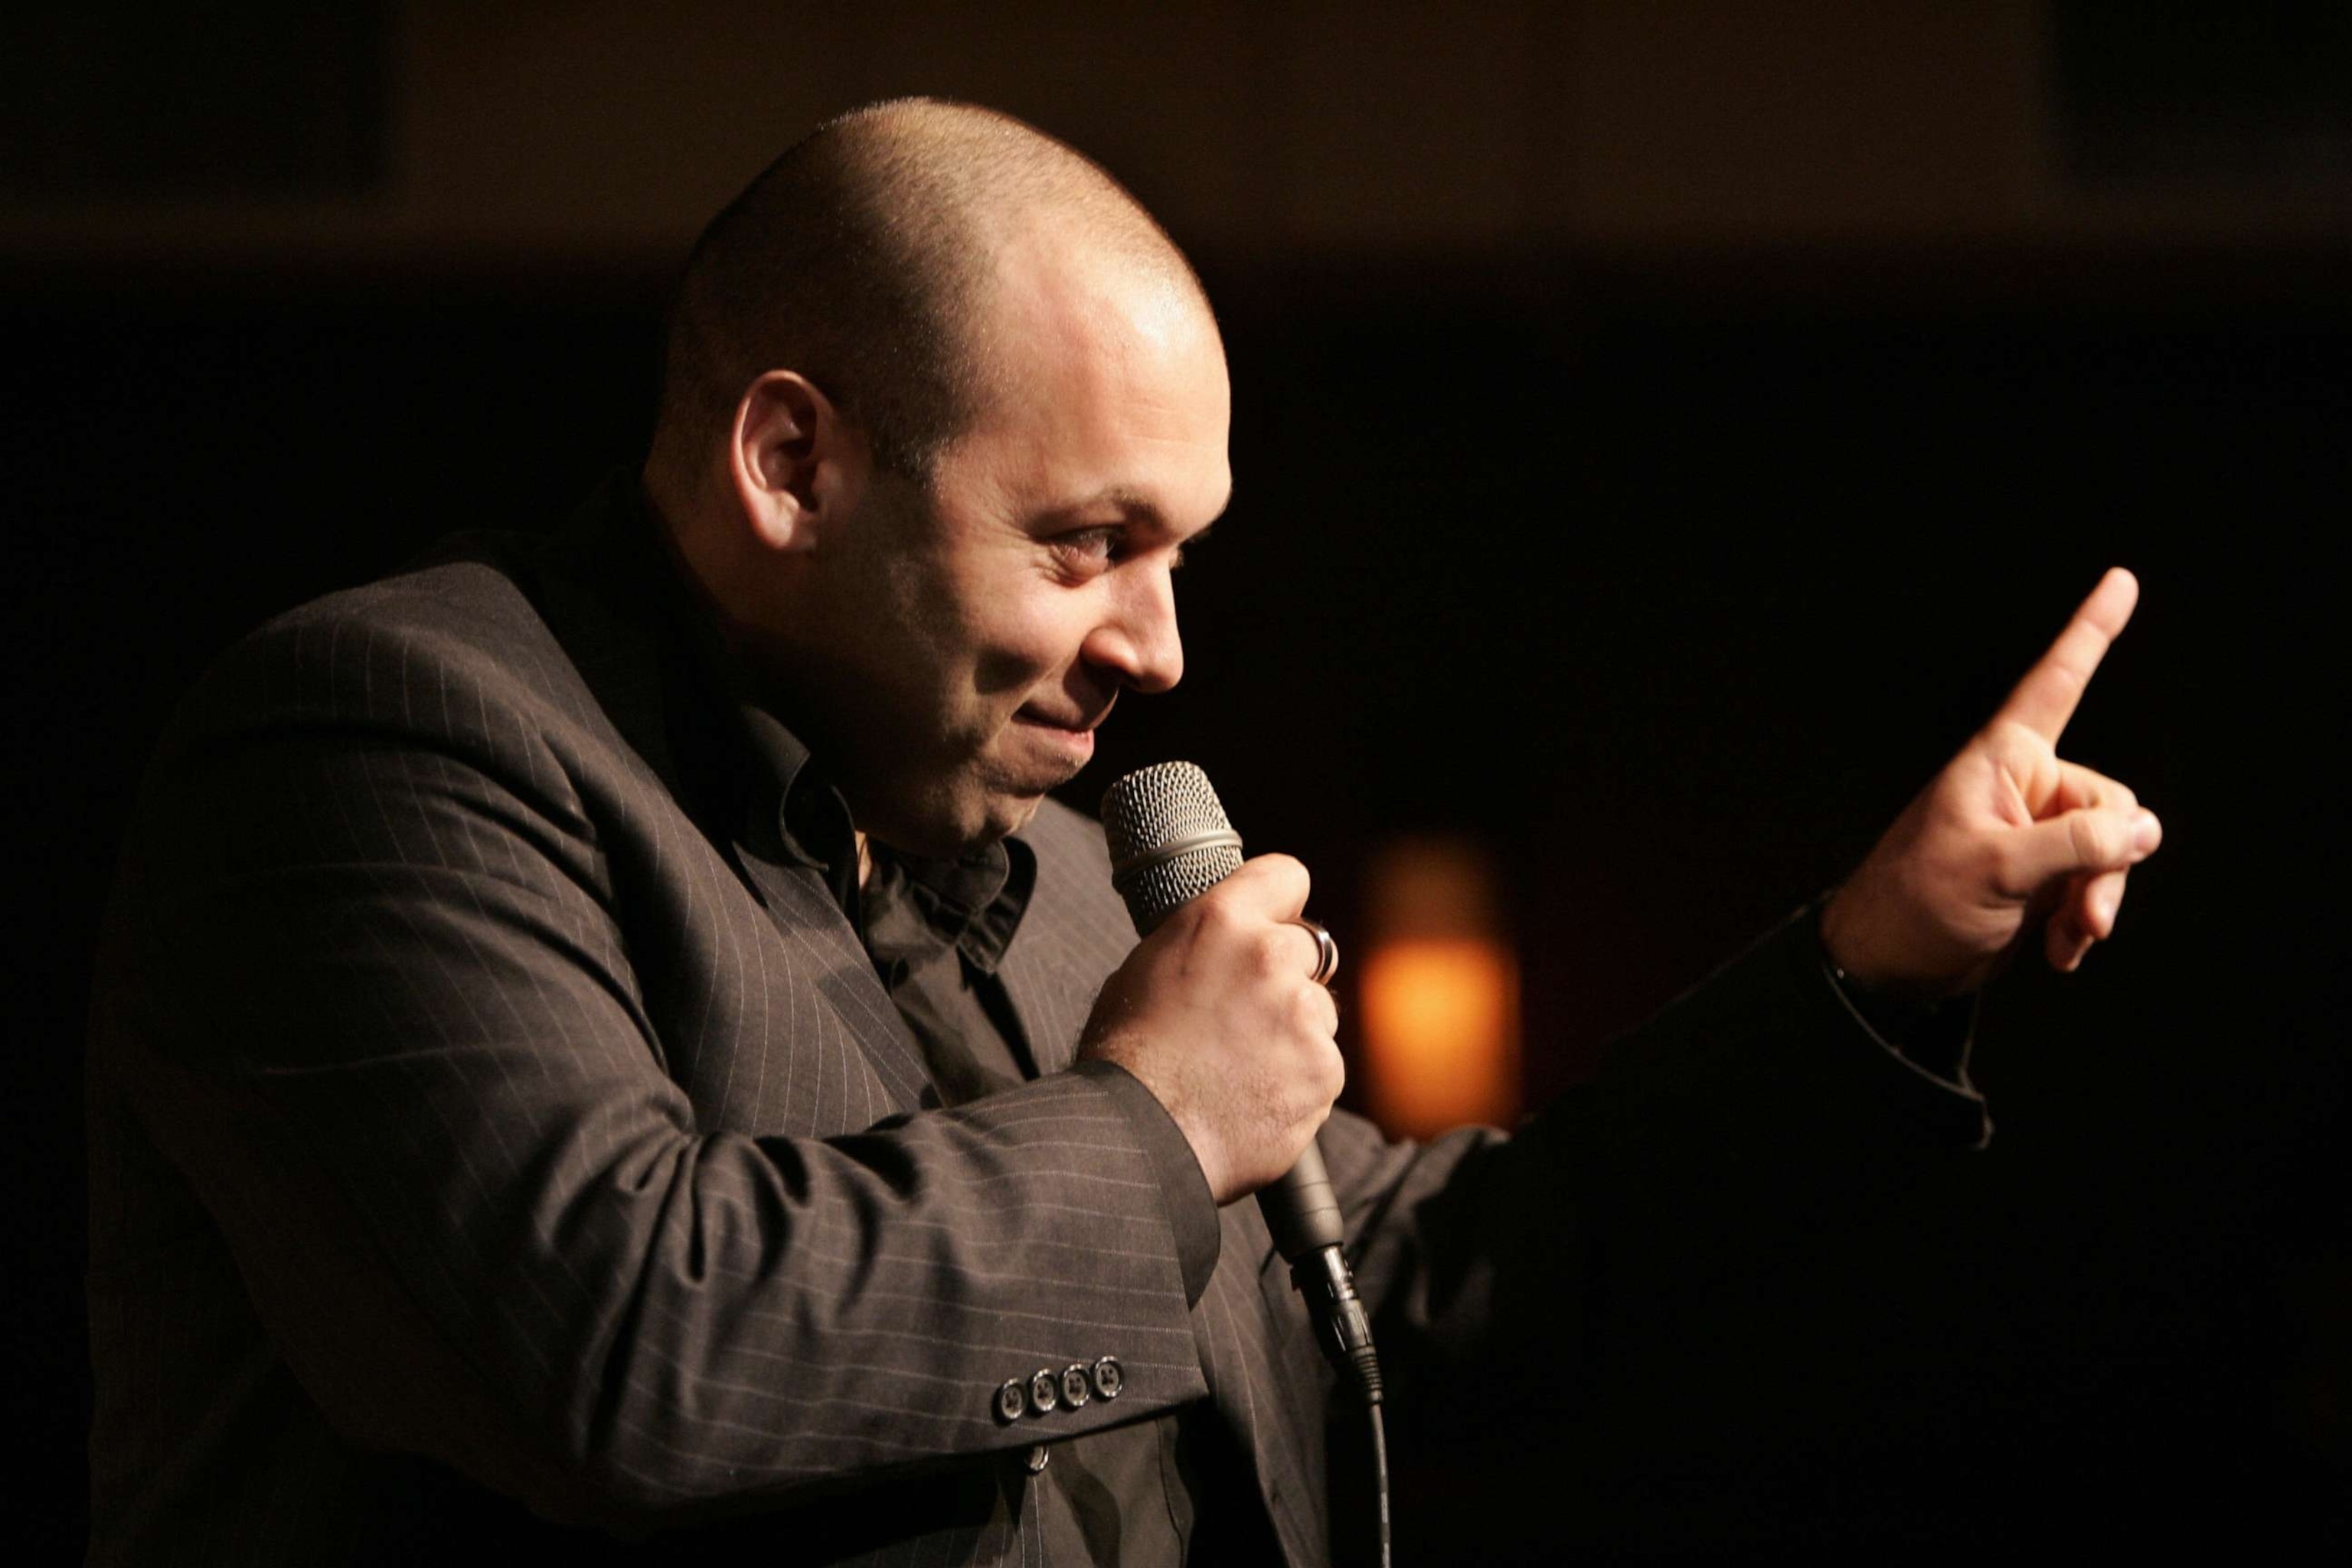 PHOTO: Amer Zahr performs his stand-up routine at the New York City Improv Comedy Club 15 on Nov. 2005, as part of the 3rd Annual New York Arab-American Comedy Festival (NYAACF).